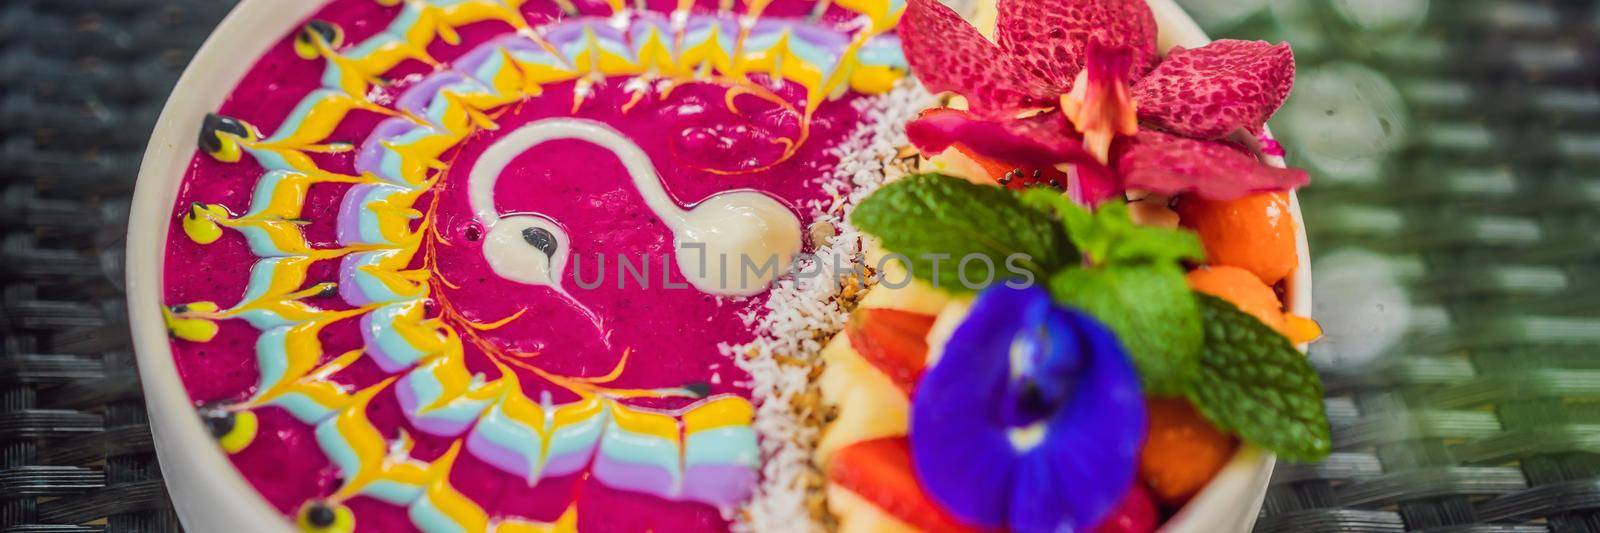 BANNER, LONG FORMAT Healthy tropical breakfast, smoothie bowl with tropical fruits, decorated with a pattern of colorful yogurt with turmeric and spirulina. It is also decorated with fruits, flowers, chia seeds, coconut, granola, pineapple, mint and strawberries by galitskaya